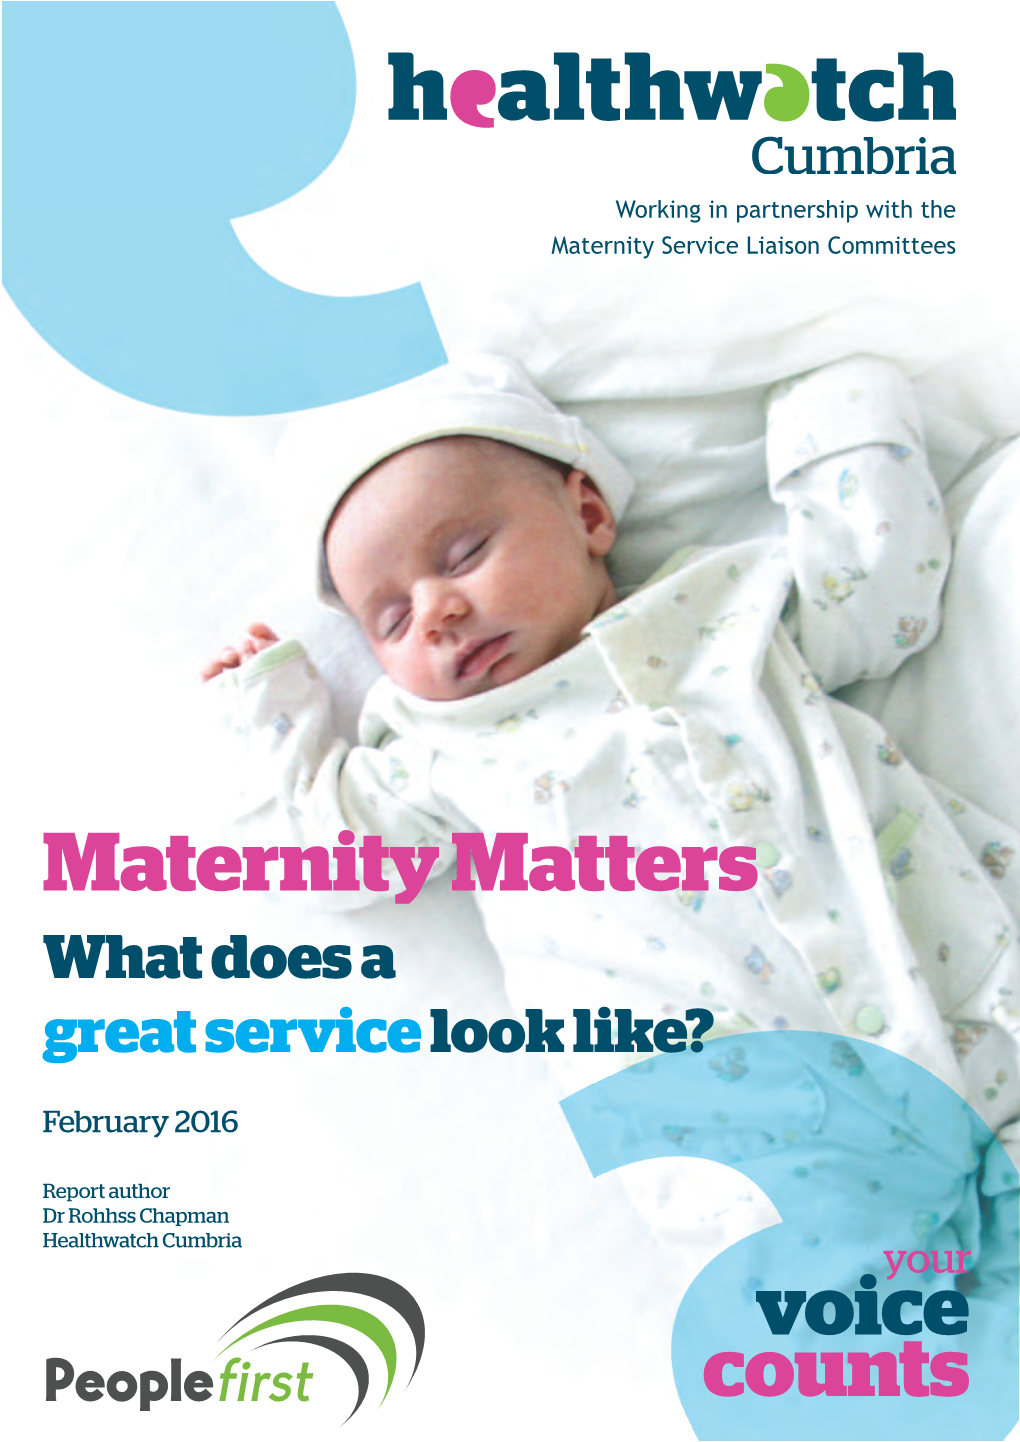 Maternity Matters What Does a Great Service Look Like?